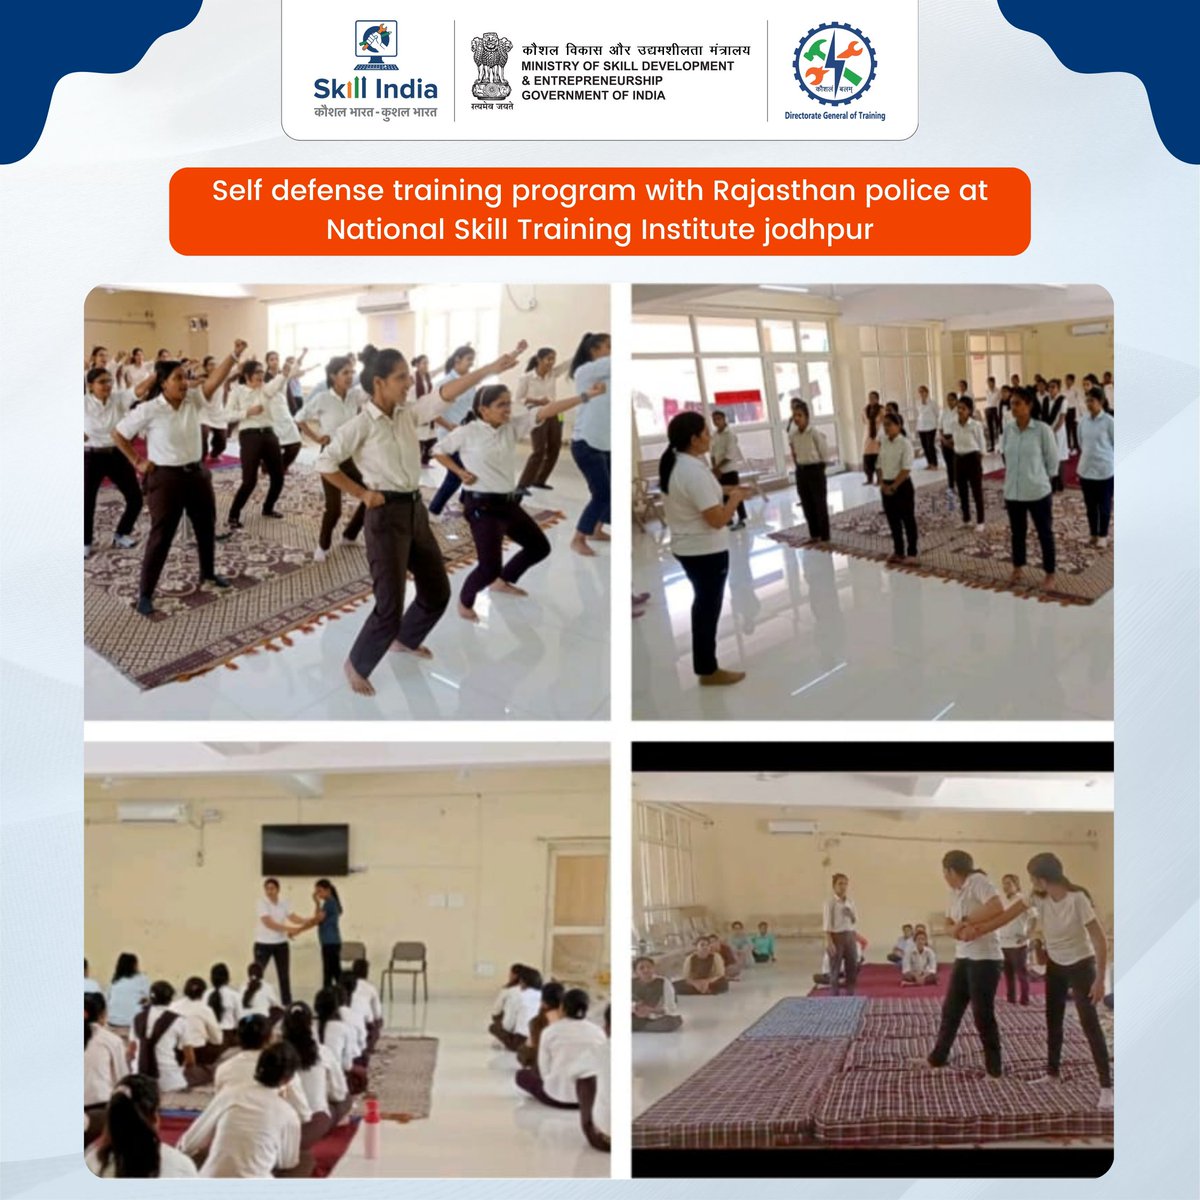 Girls mastering self-defense - an essential skills!

Excited to announce the successful conclusion of our self-defense training program with Rajasthan Police at National Skill Training Institute (NSTI) Jodhpur. Here's to our girls gaining courage and strength to tackle